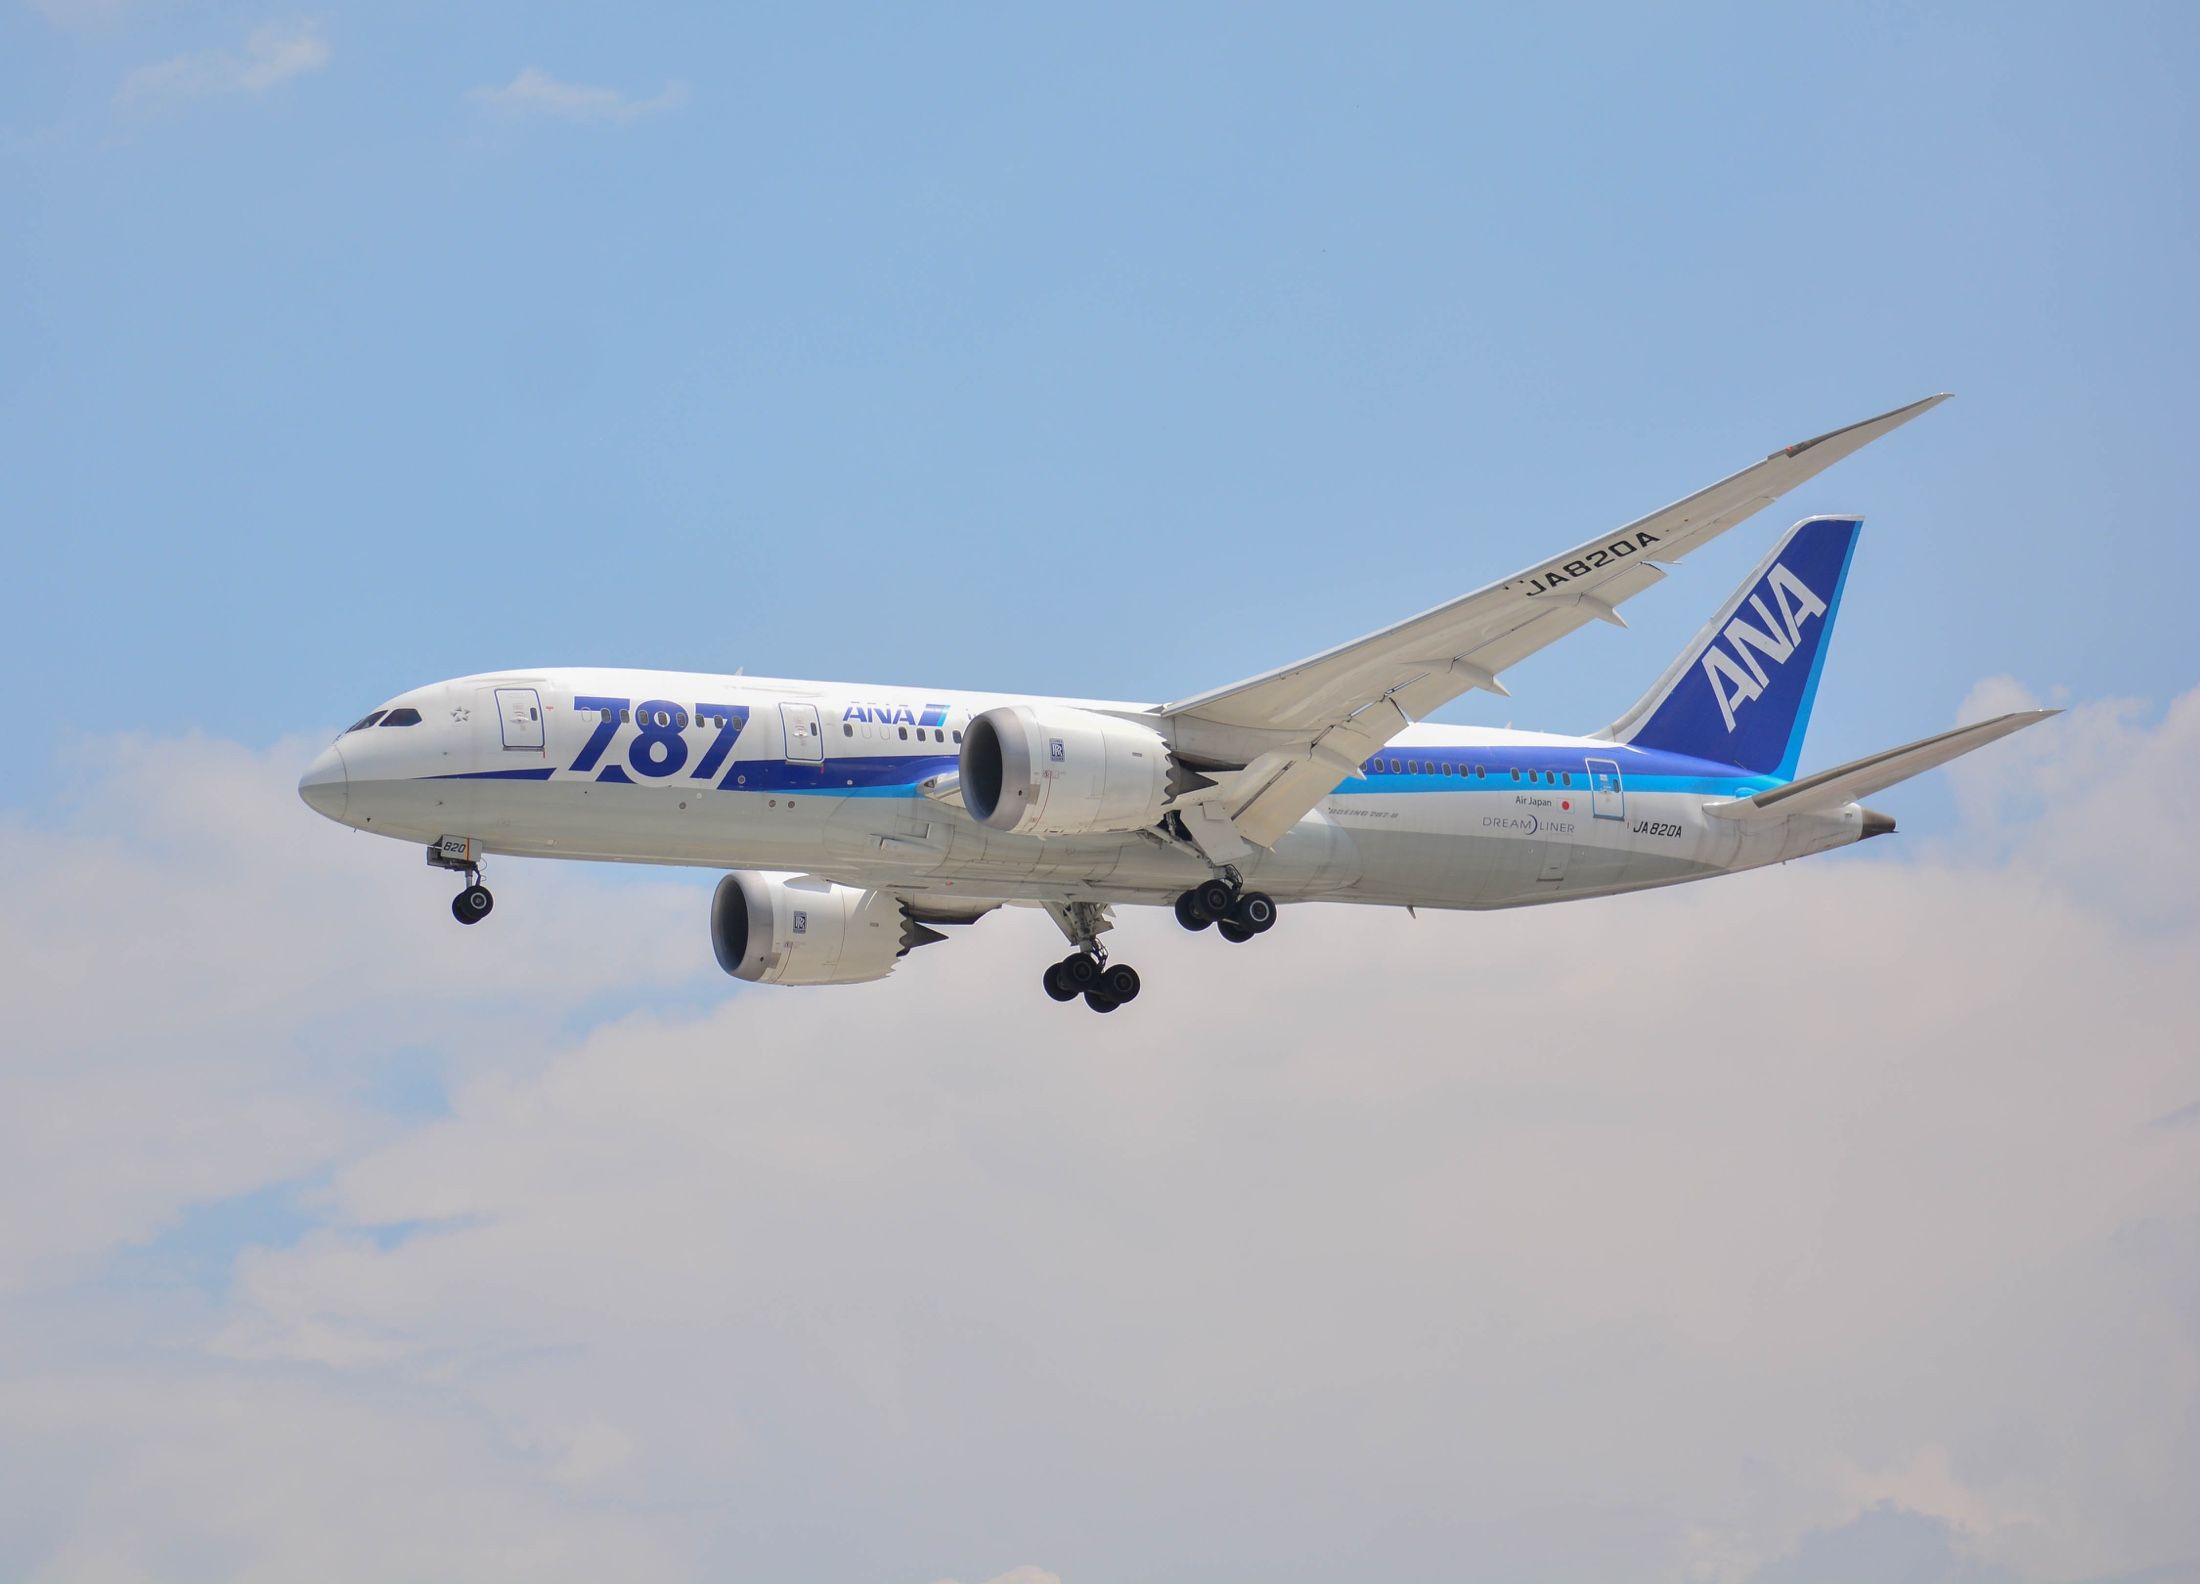 ANA operates all three variants of the Boeing 787 Dreamliner